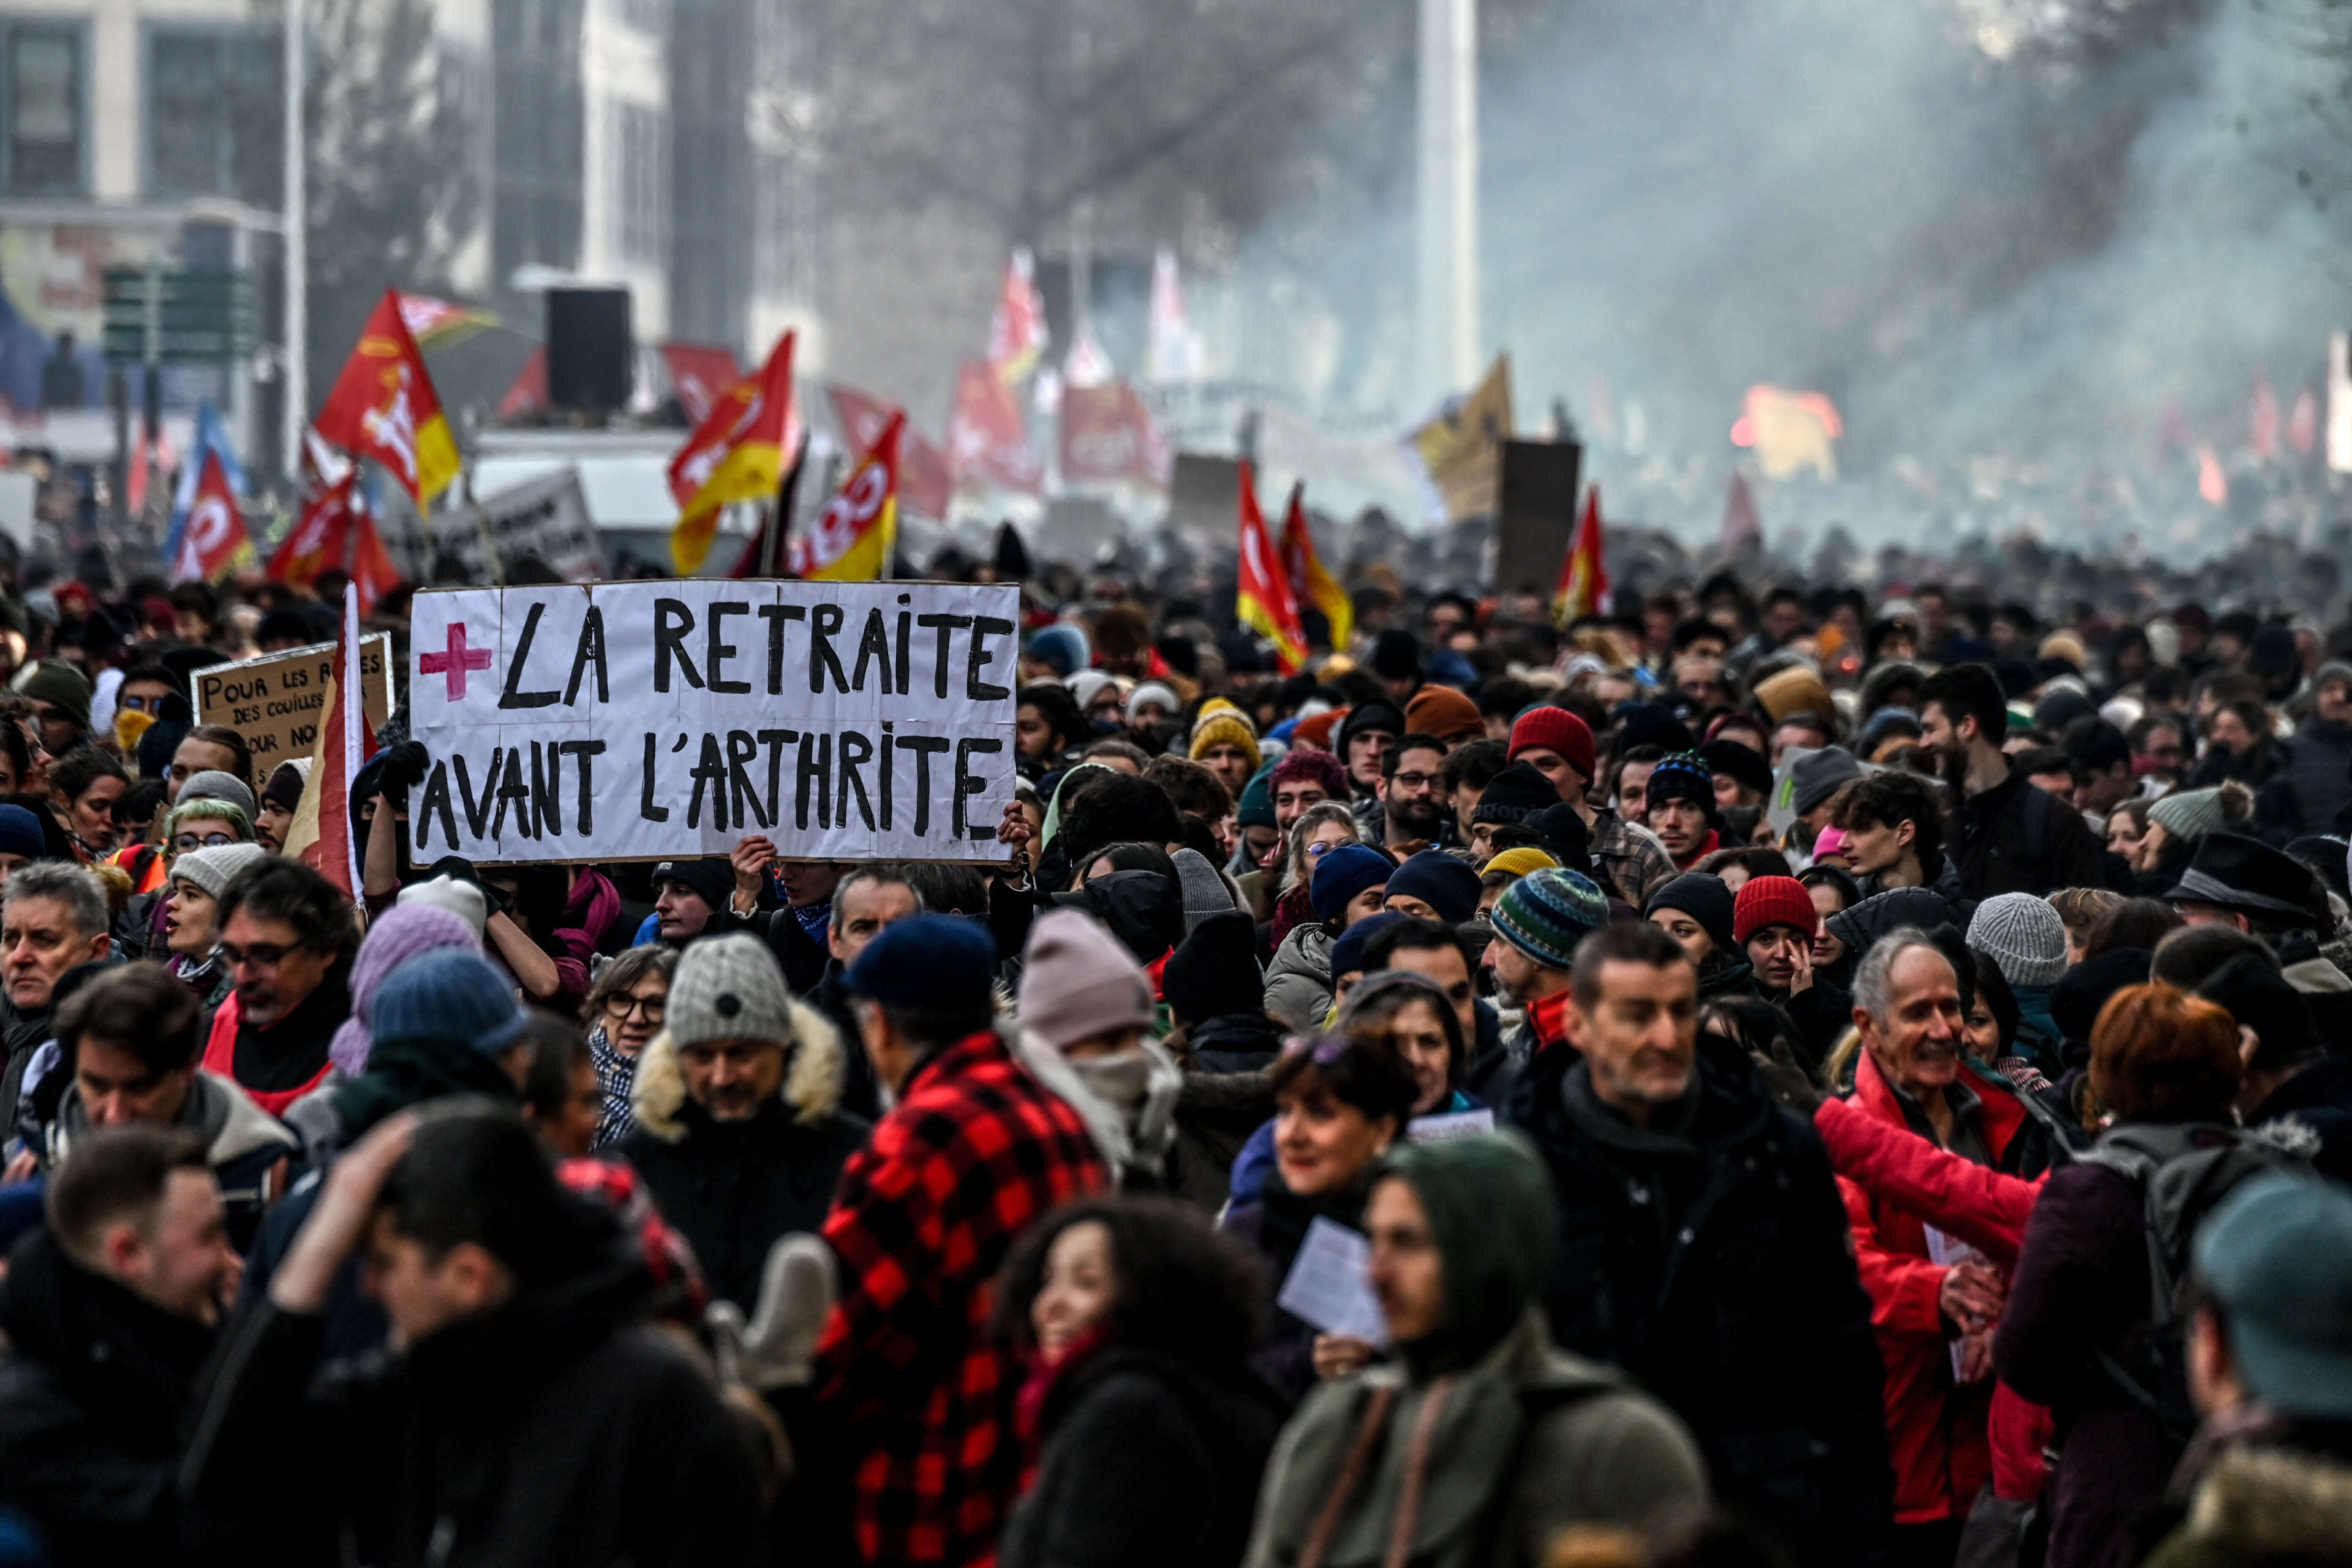 A protestor holds a placard which reads as 'retirement before arthritis' during a rally in Lyon, south-eastern France on January 19, 2023, as workers go on strike over the French President's plan to raise the legal retirement age from 62 to 64. - A day of strikes and protests kicked off in France on January 19, set to disrupt transport and schooling across the country in a trial for the government as workers oppose a deeply unpopular pensions overhaul. (Photo by OLIVIER CHASSIGNOLE / AFP)